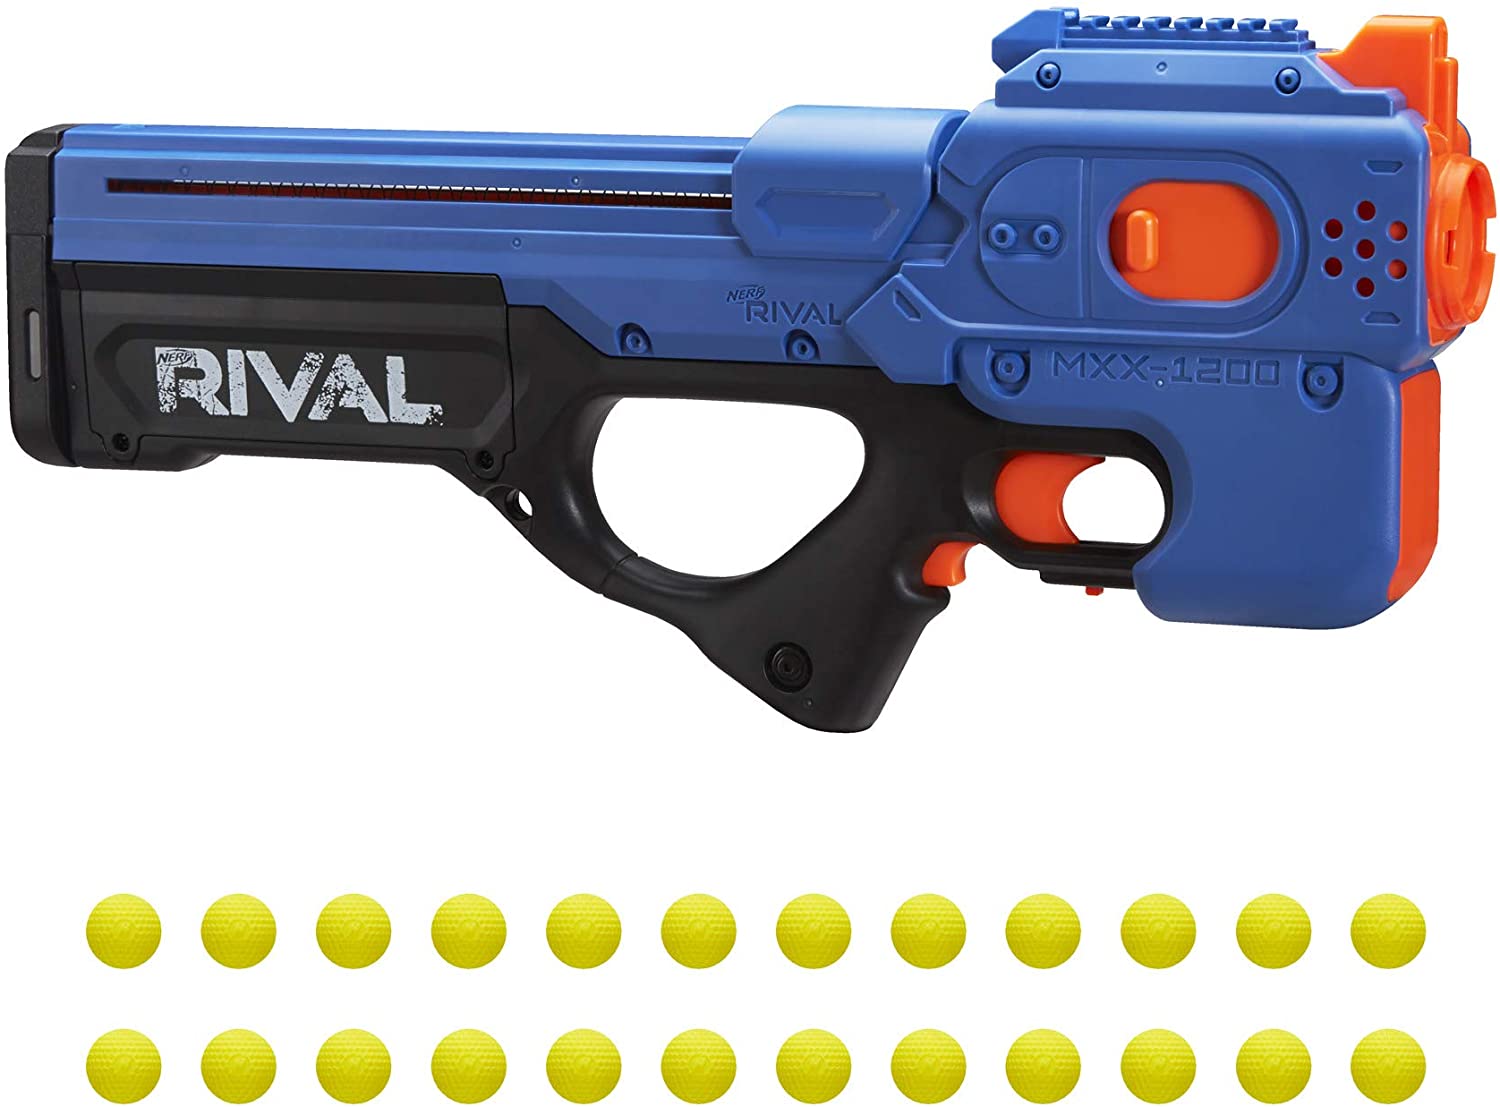 Introducir 97+ imagen nerf rival charger mxv 1200